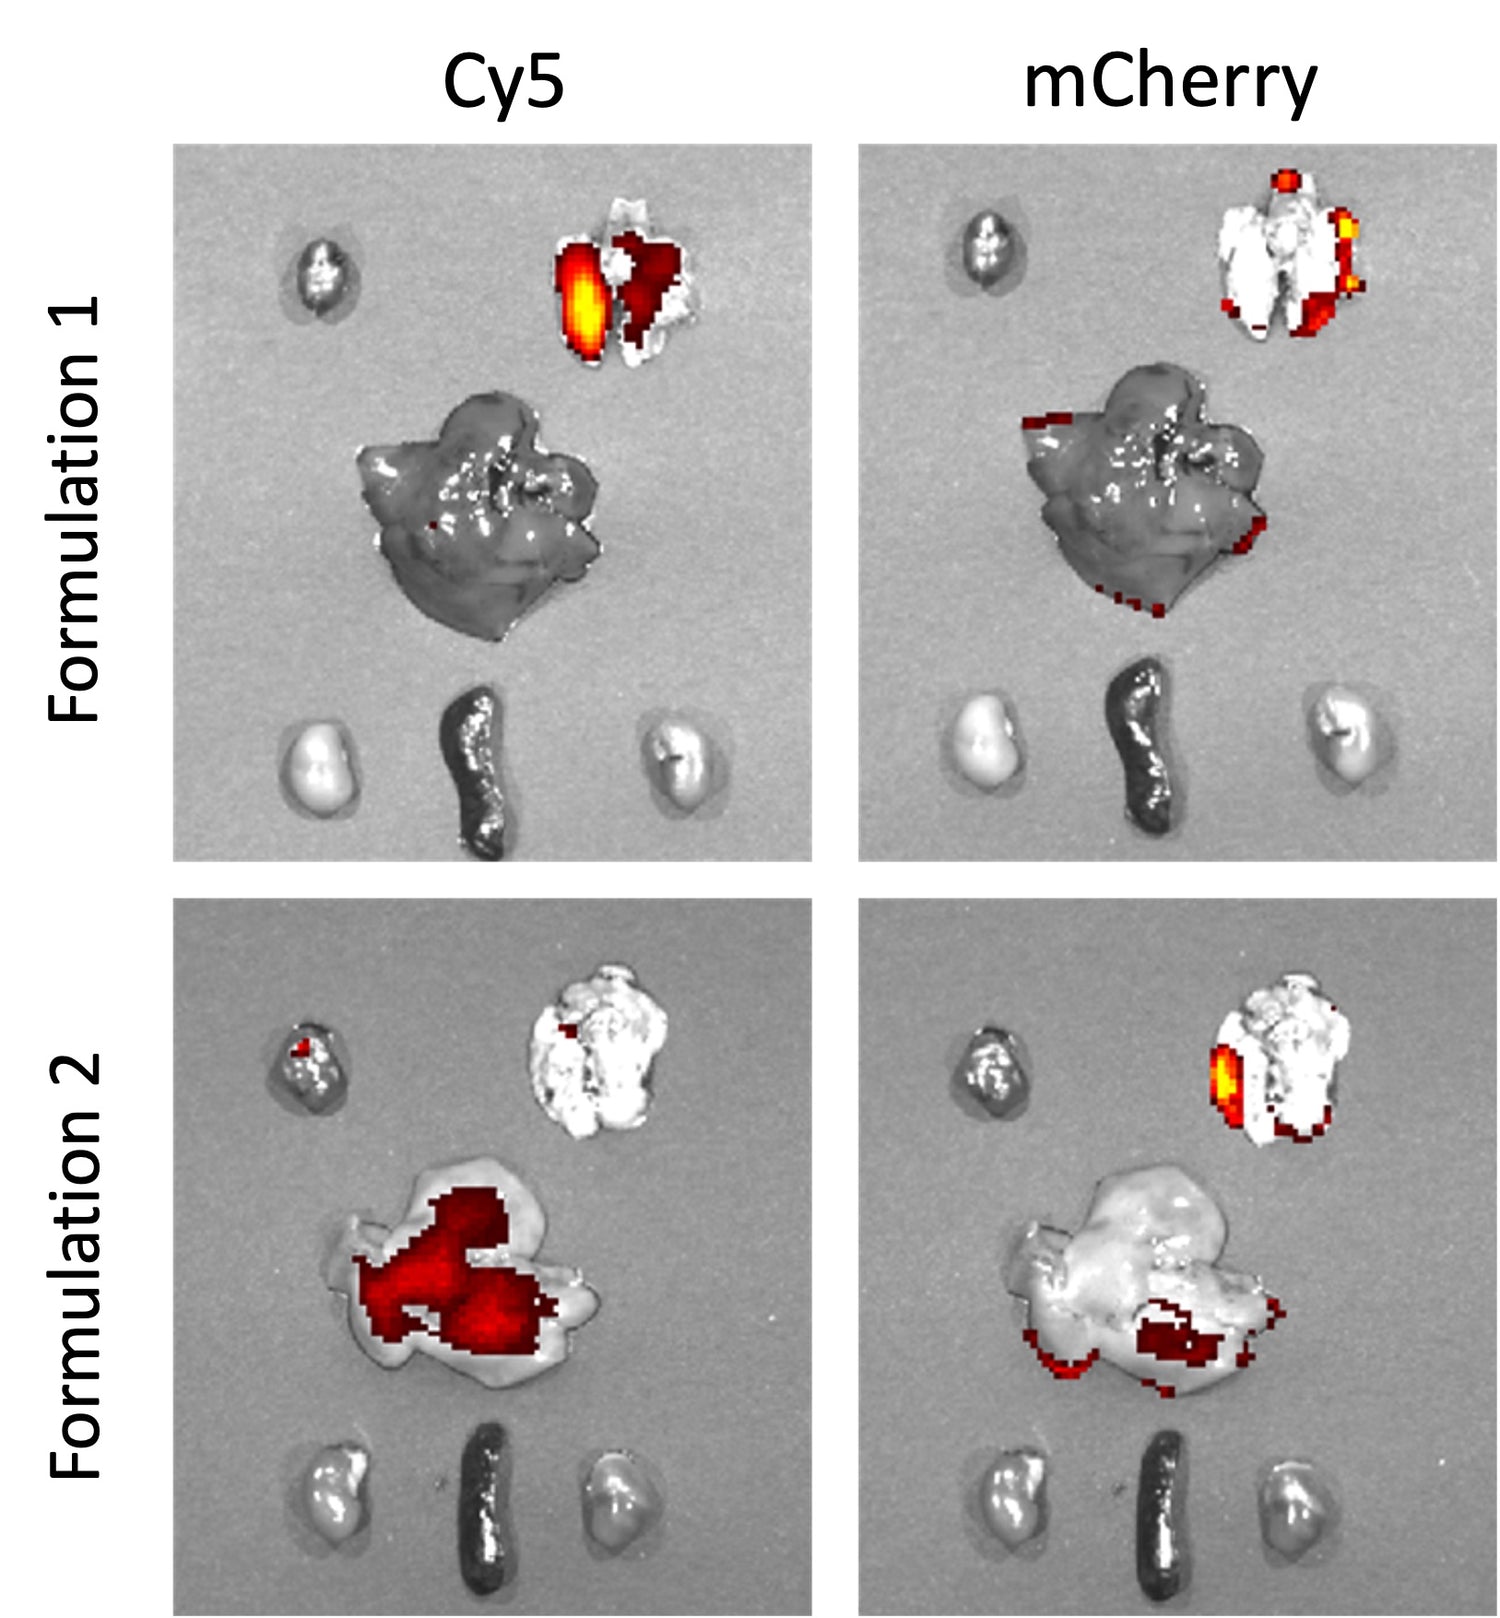 cy5 mCherry mRNA in vivo expression with two different LNP formulation